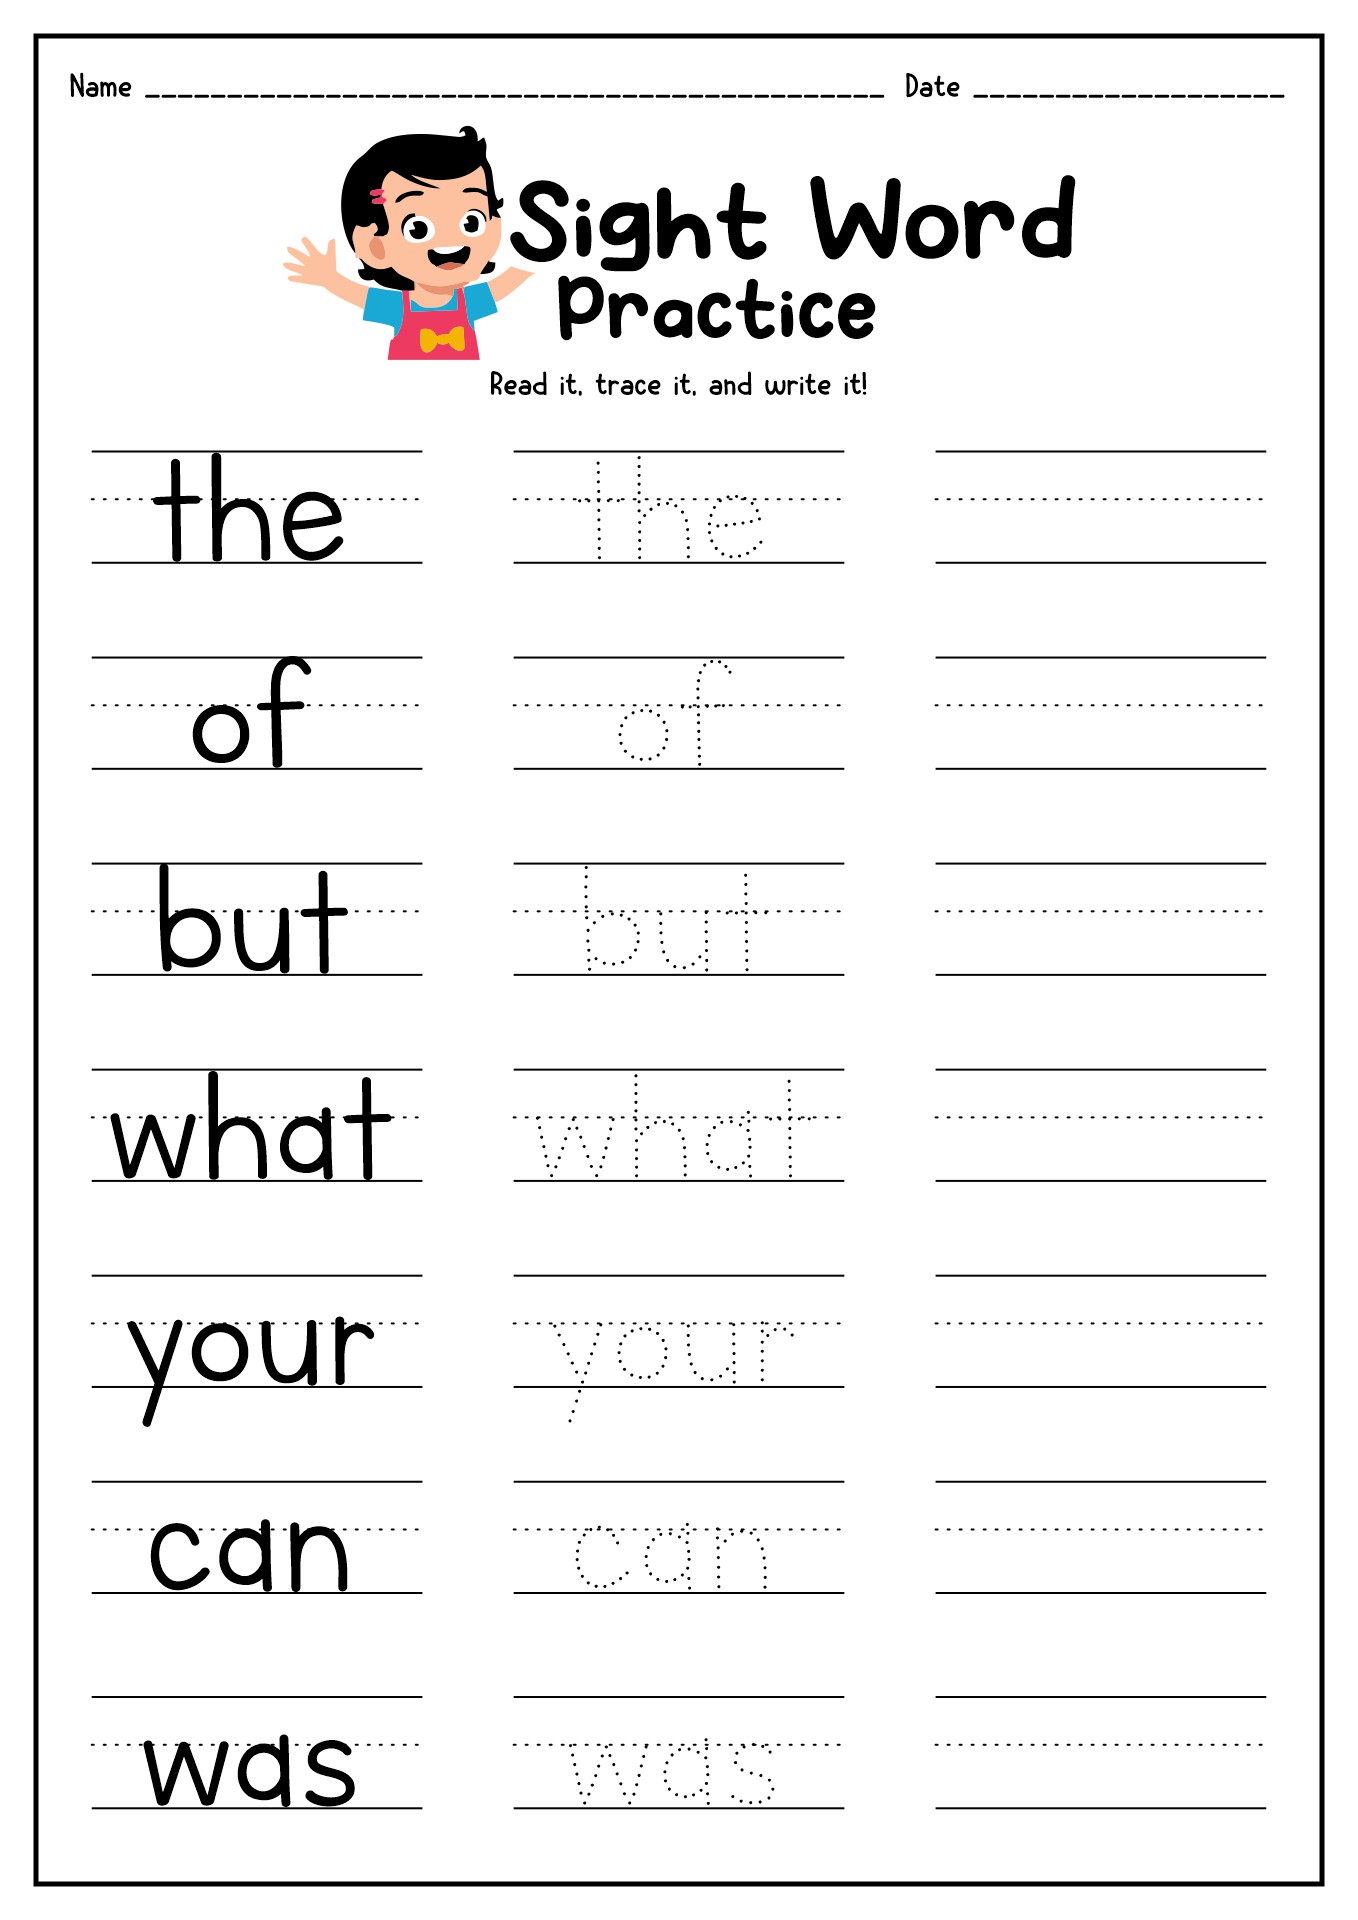 19-best-images-of-fry-s-first-100-words-worksheets-100-fry-sight-word-worksheet-fry-first-100